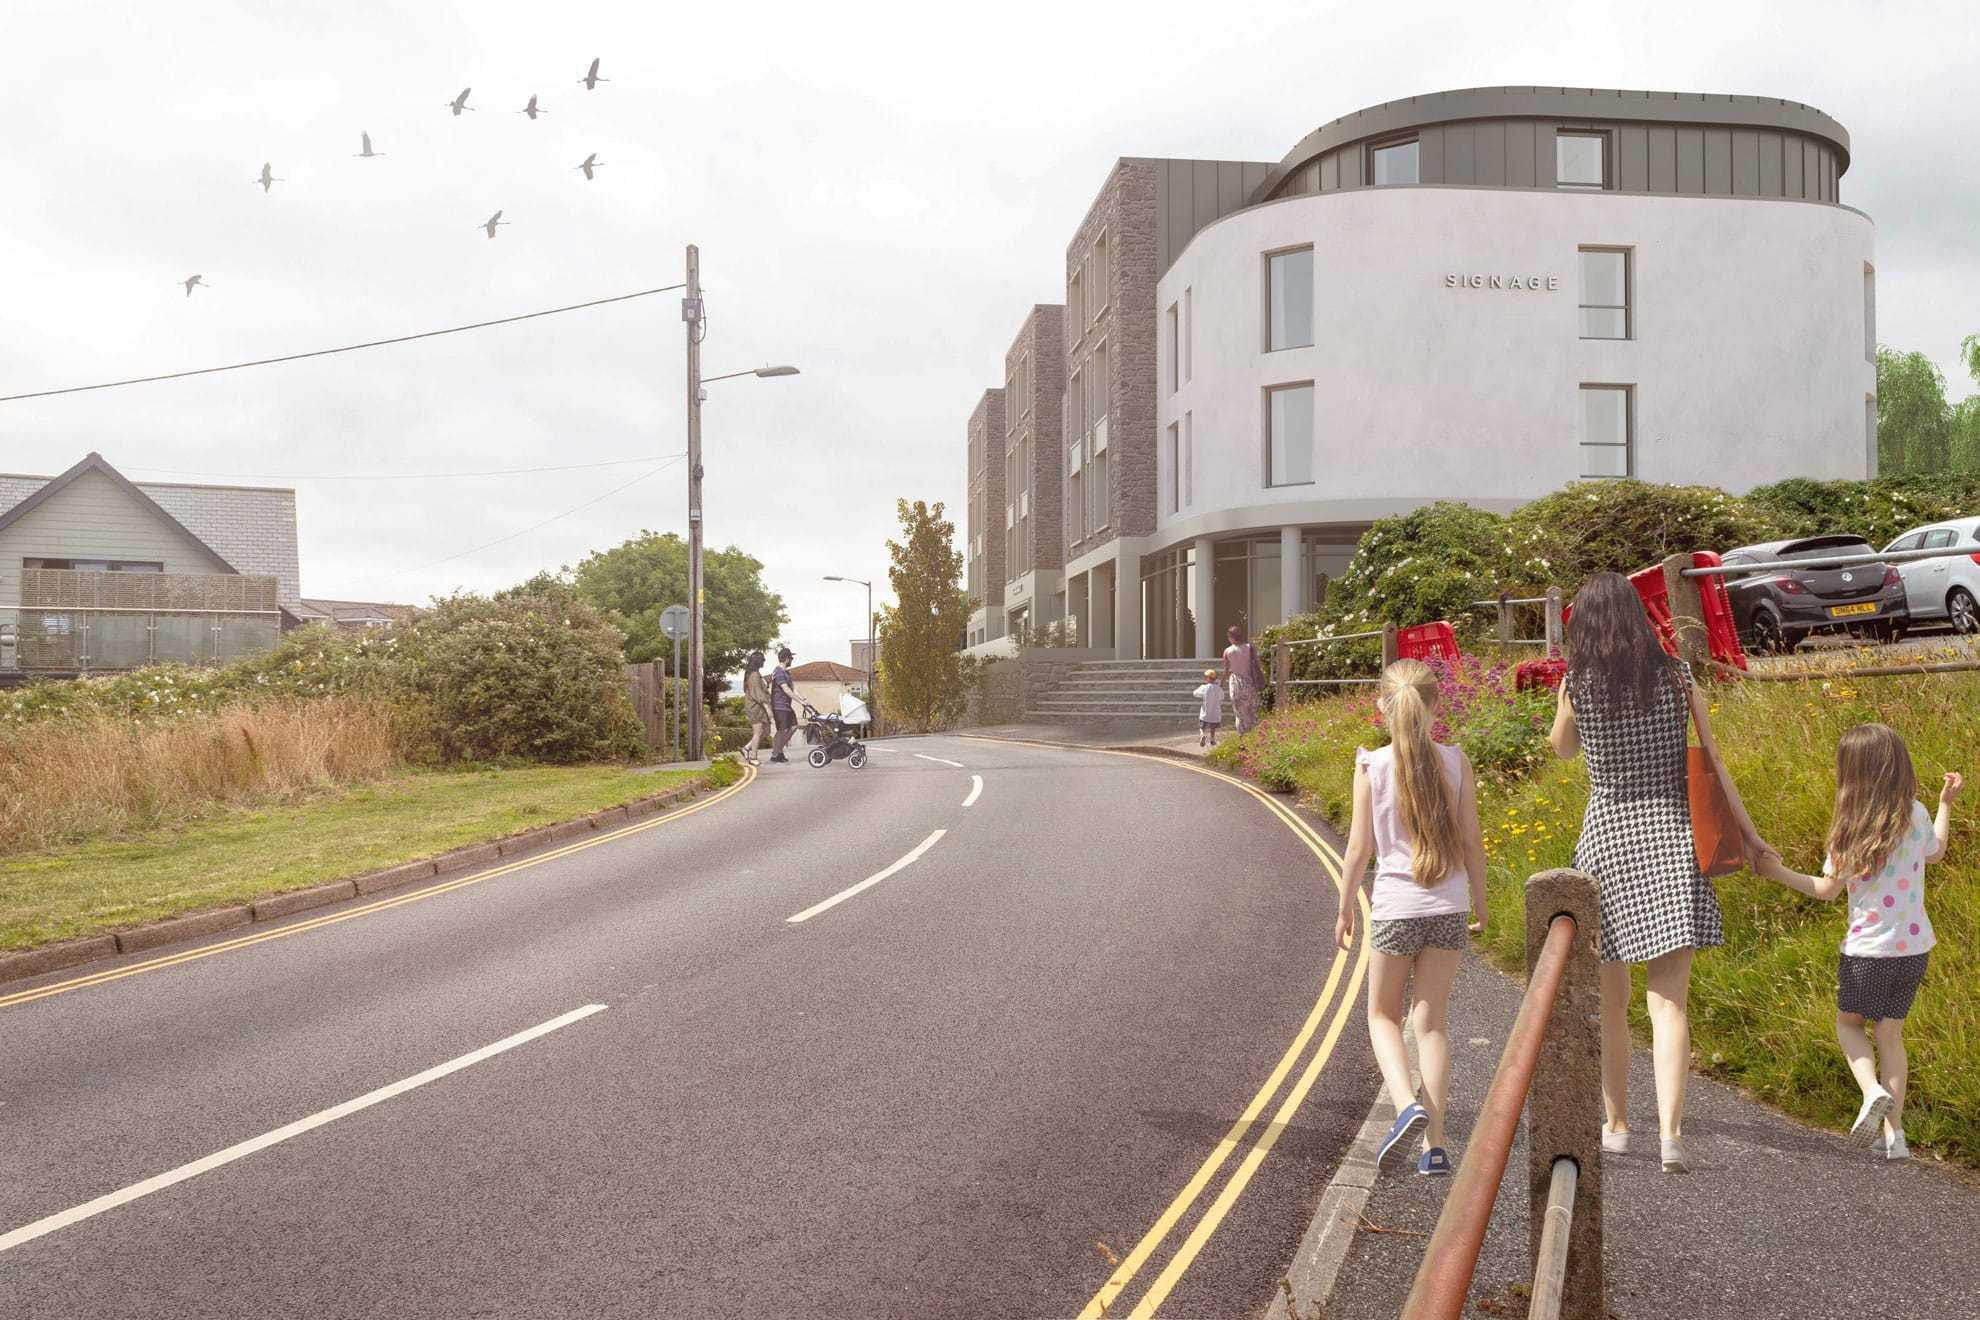 How the revised Premier Inn in St Ives would look (Photo: Whitbread)